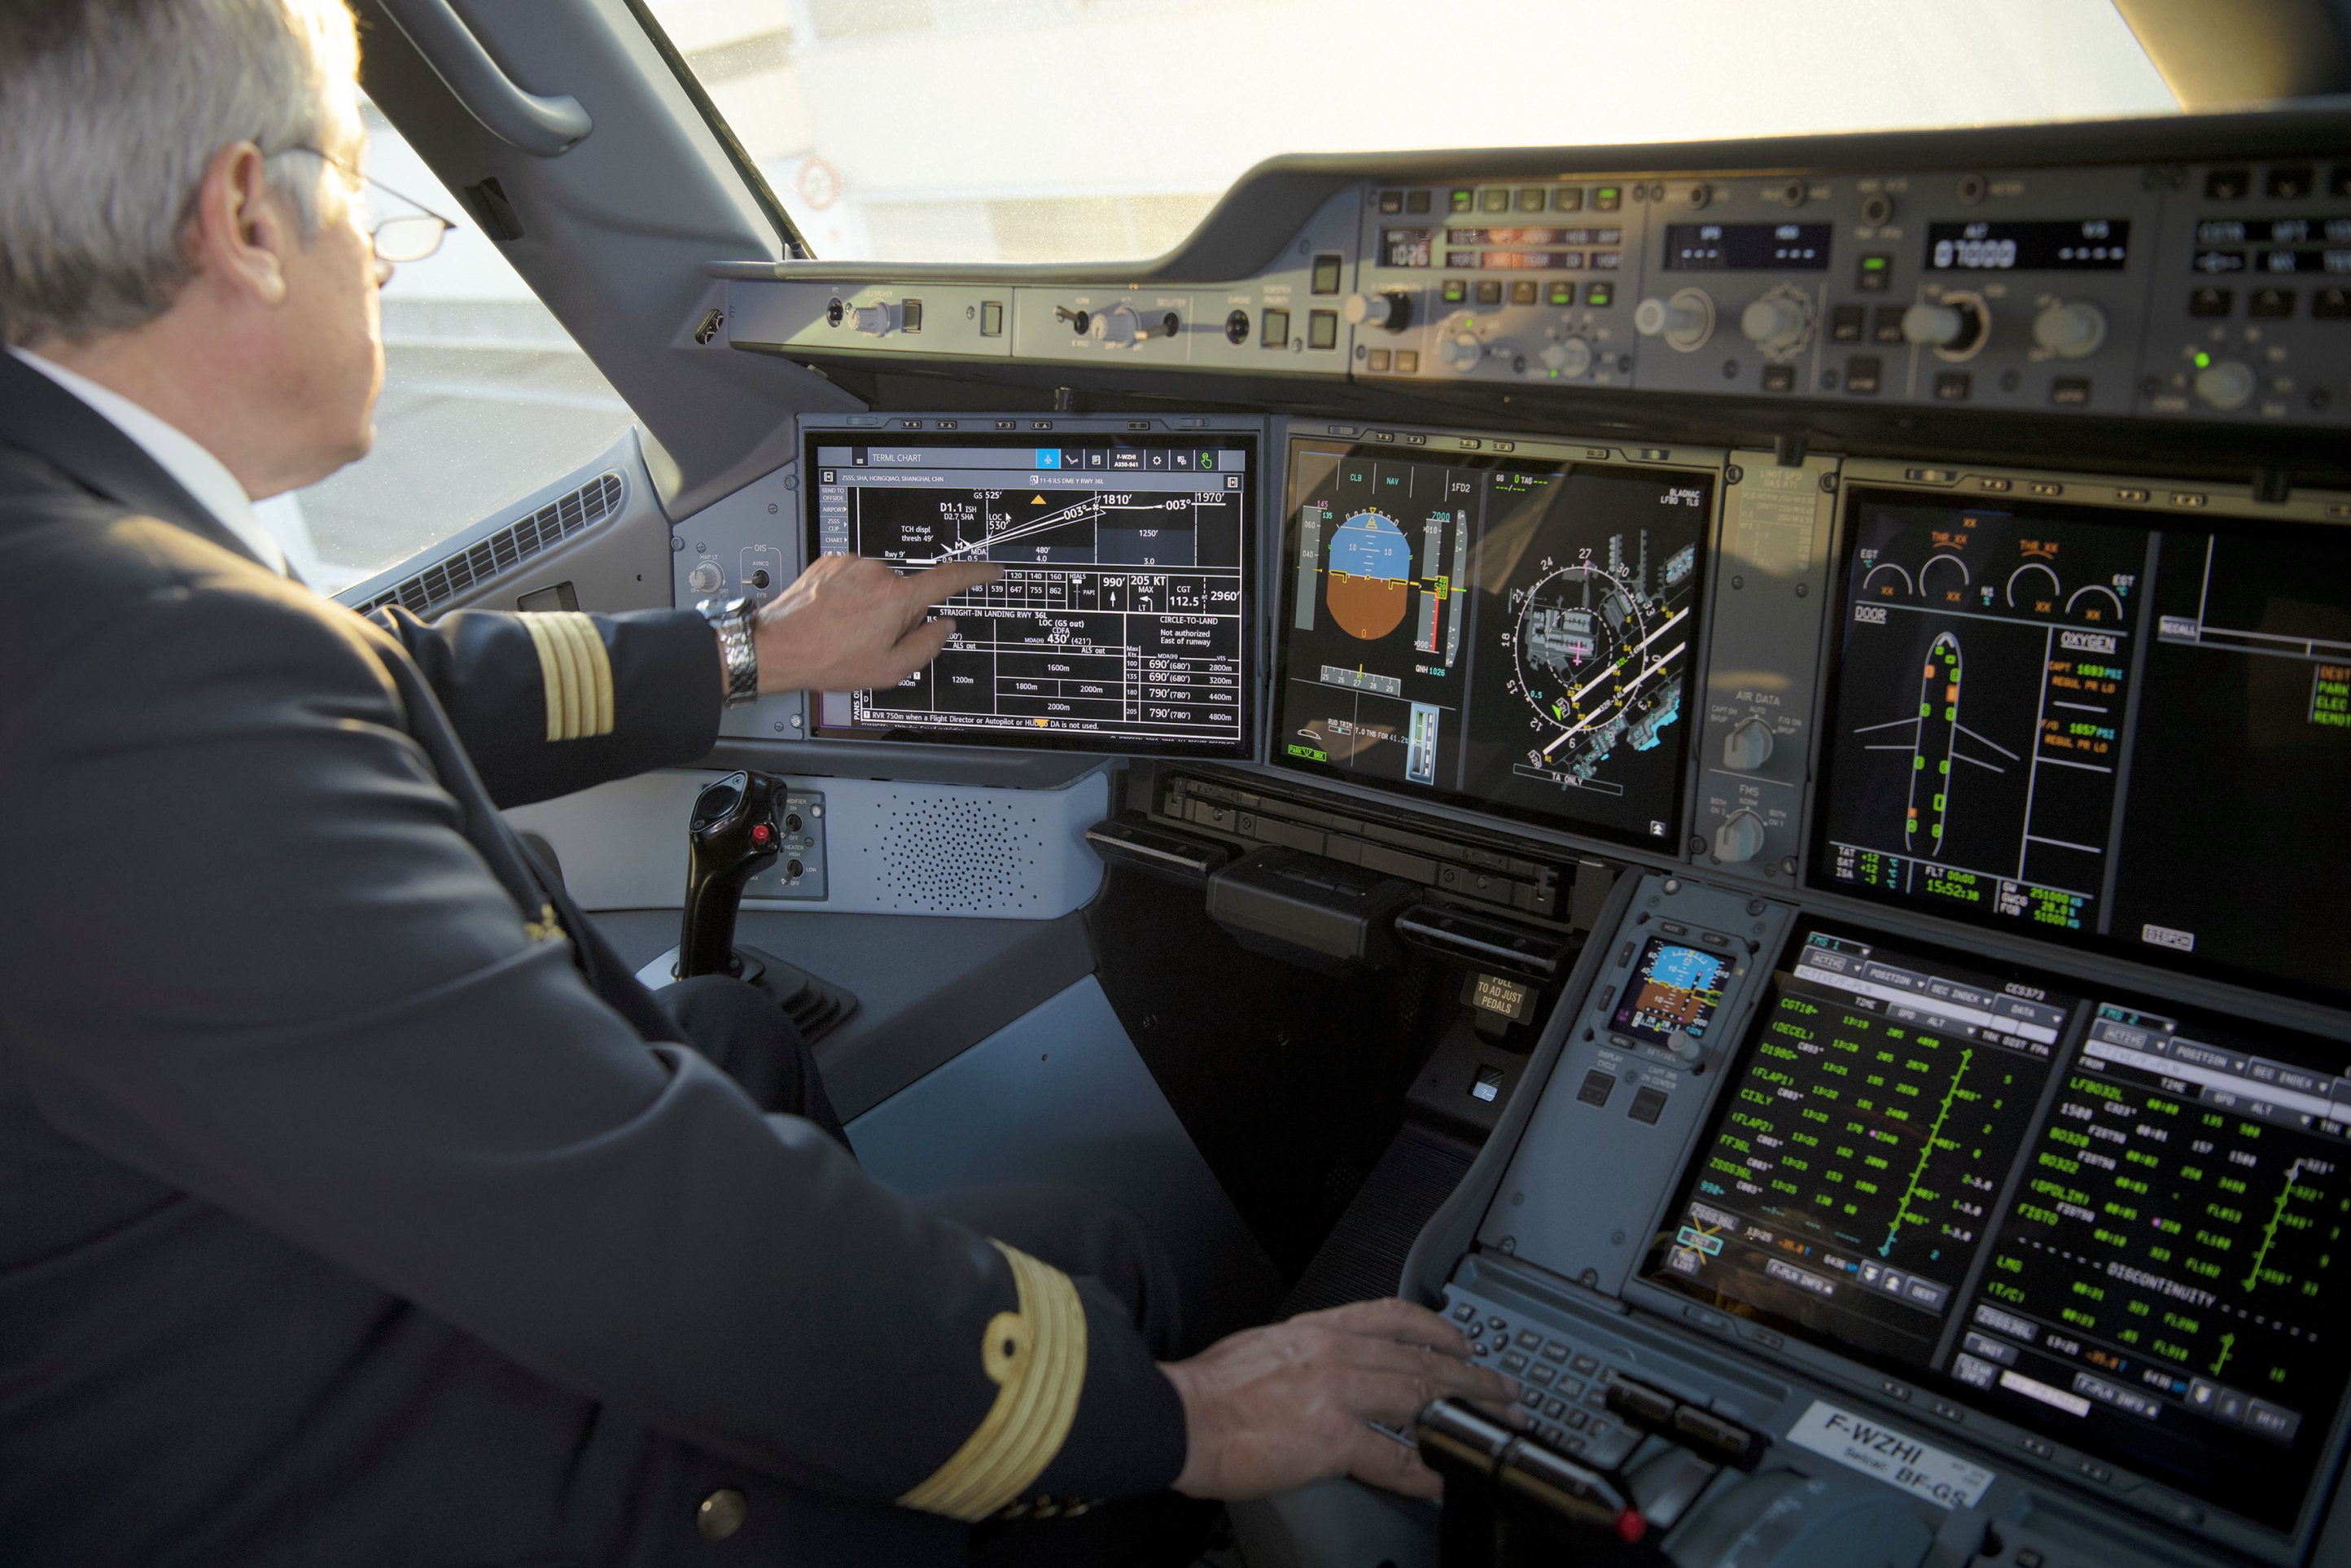 This new method of input complements the existing physical keyboard integrated into the retractable table in front of each pilot and also the keyboard and trackball “keyboard-cursor control unit” (KCCU) located on the centre console. Click to enlarge.